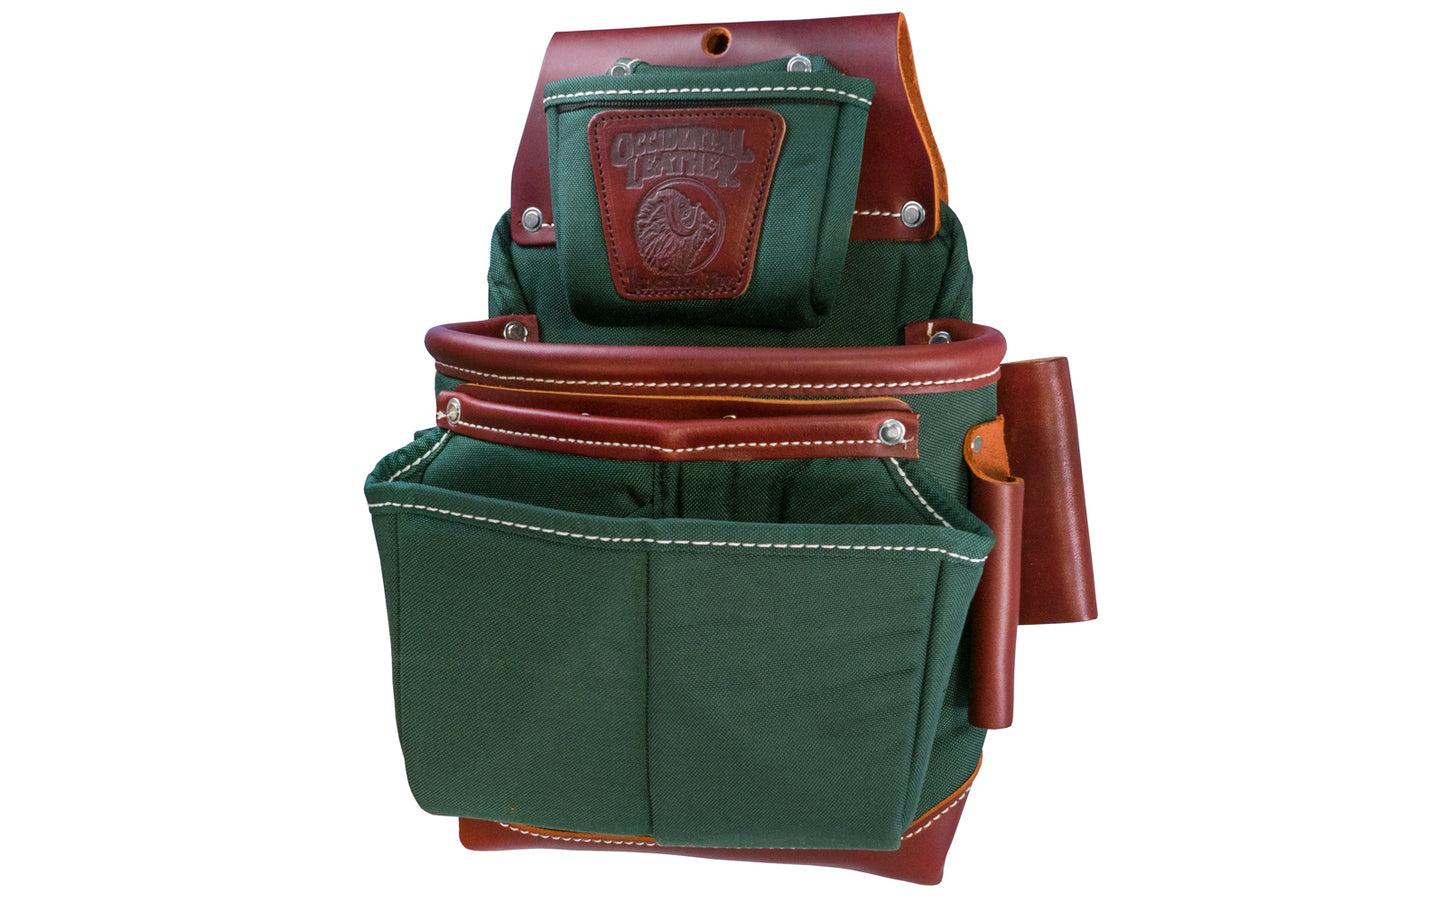 Occidental Leather Heritage Fat Lip Fastener Bag ~ Model 8583 - Fits 3" work belt - Bags are 10" deep & feature a full leather boot along with distinctive leather "FatLip" mouth. "FatLip" keeps the bag formed, open, & protected against abrasion. Made of Nylon & genuine Leather - 10 total pockets & tool holders - Green